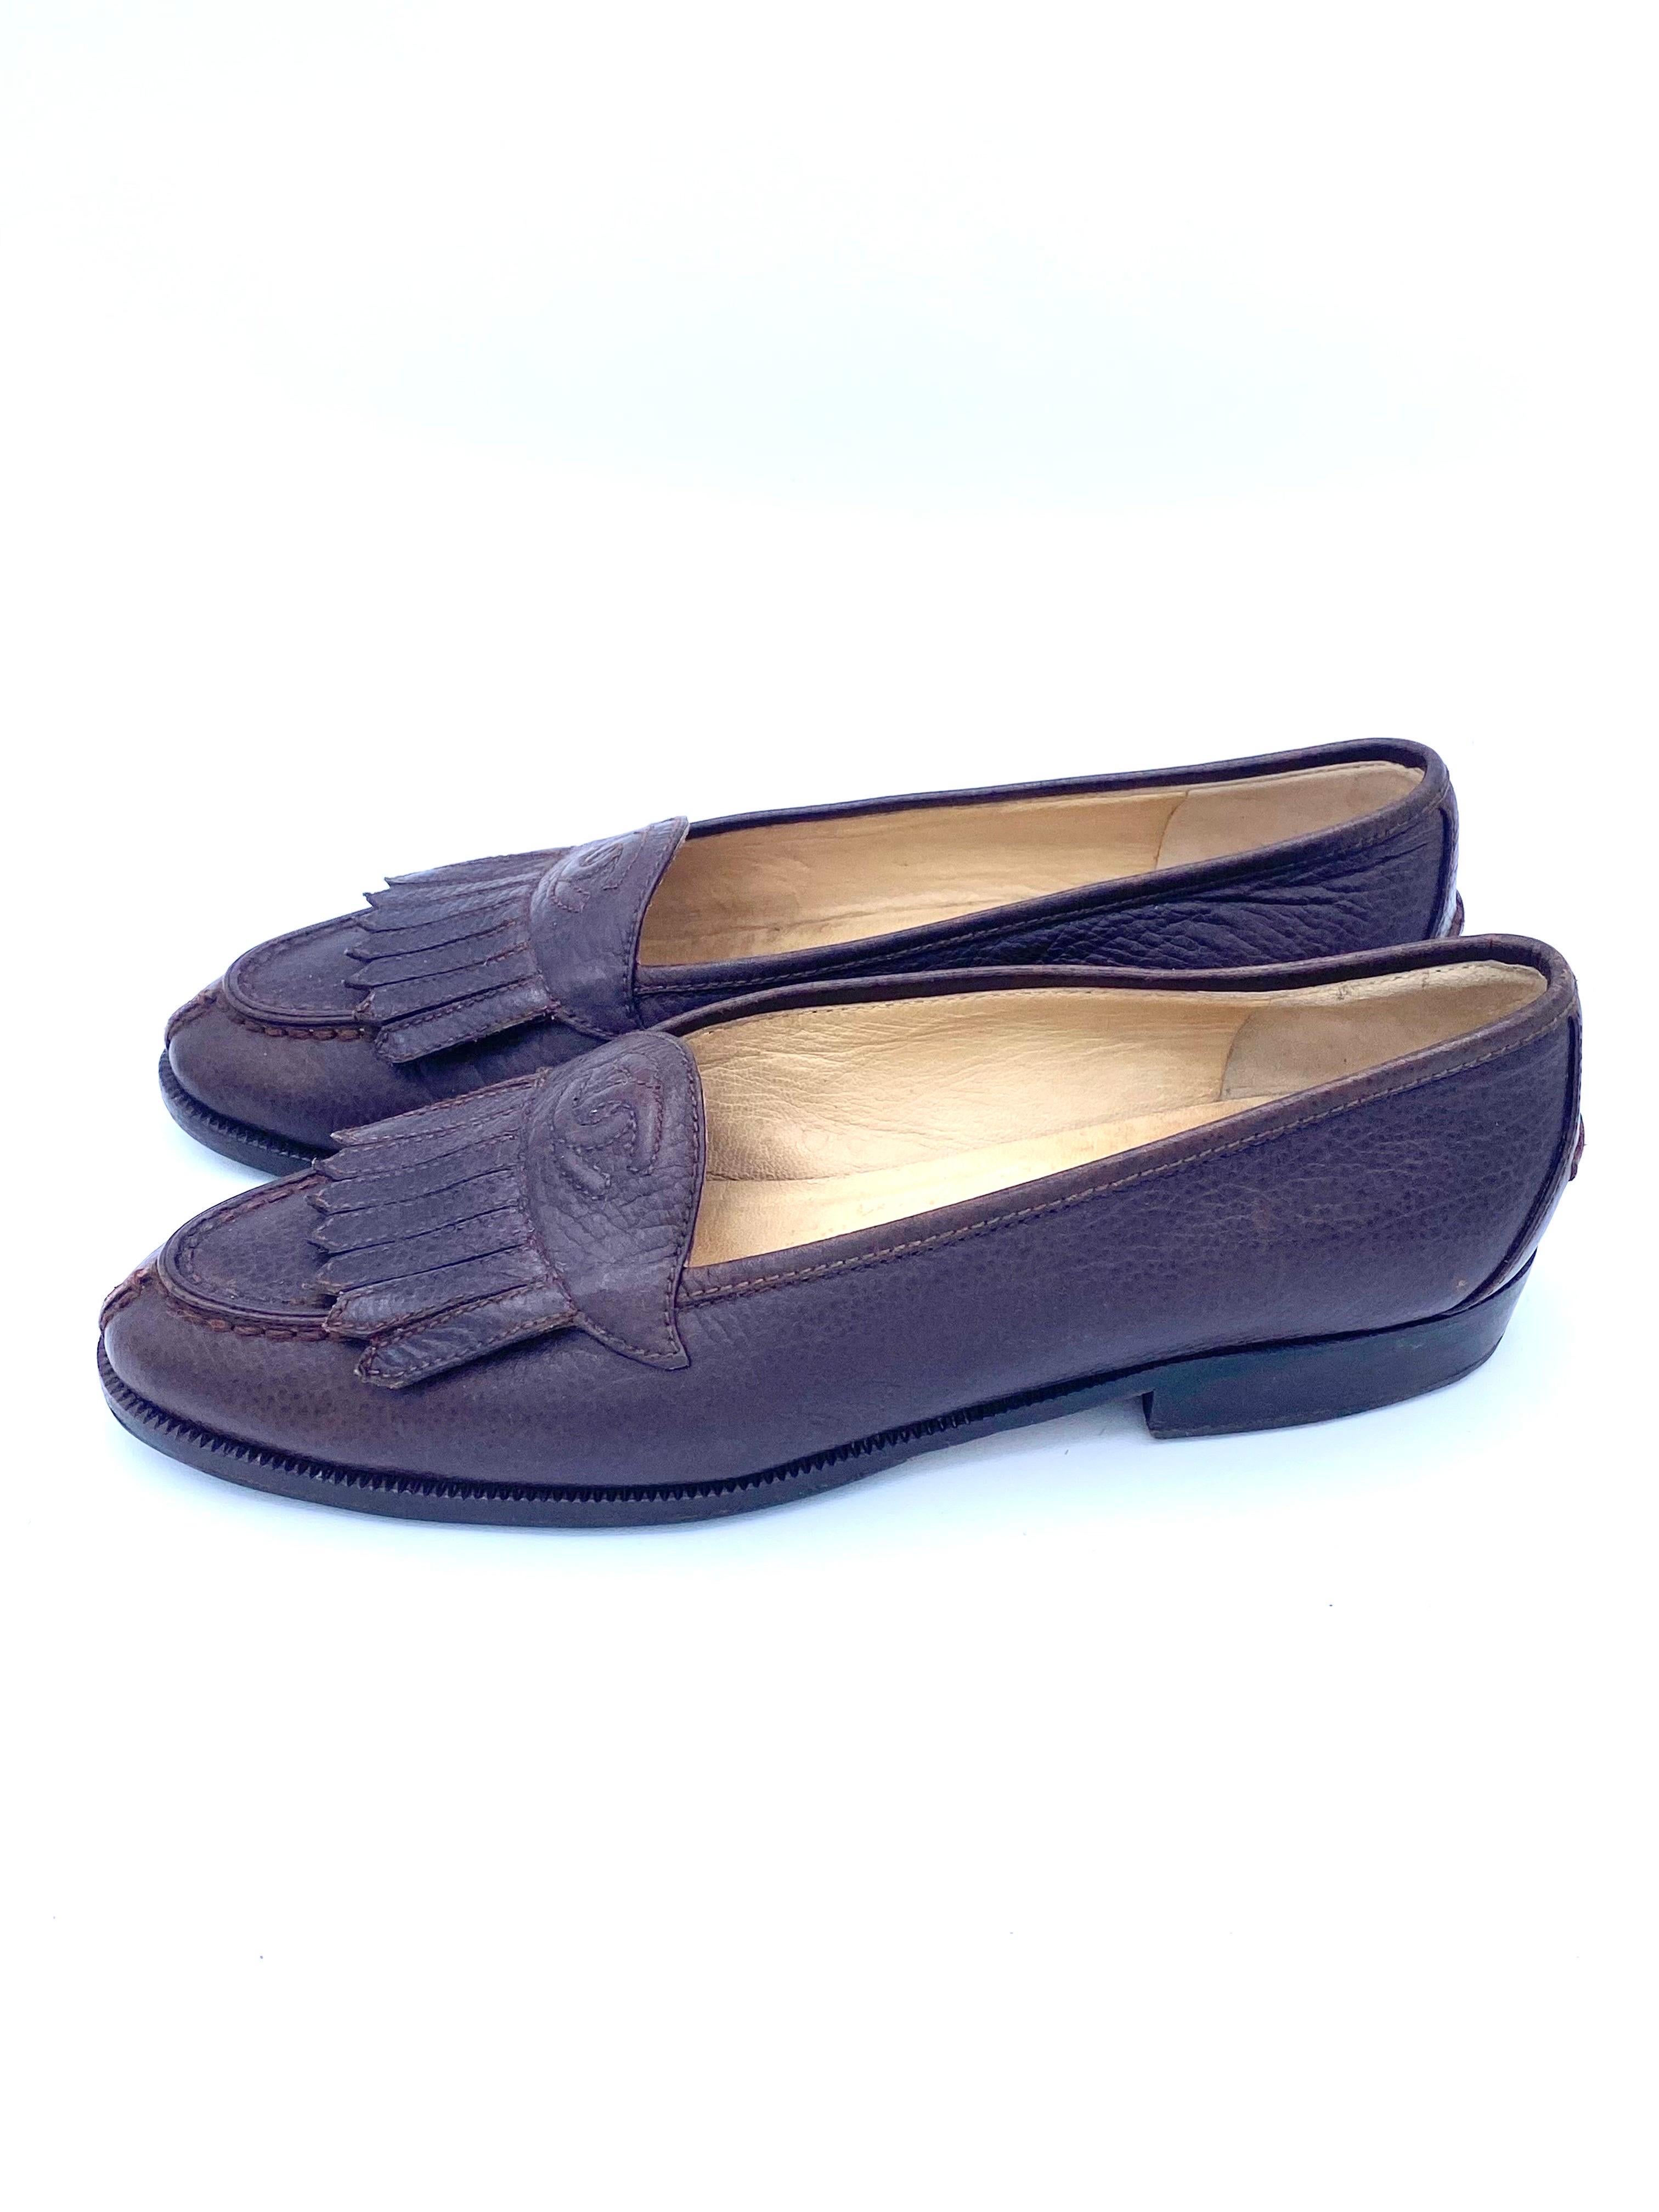 Gorgeous Vintage Chanel fringed loafers with stitched intertwined CC logo.
Dark brown grained leather.
Resoled.
Size 36
Made in Italy
Delivered without original box.